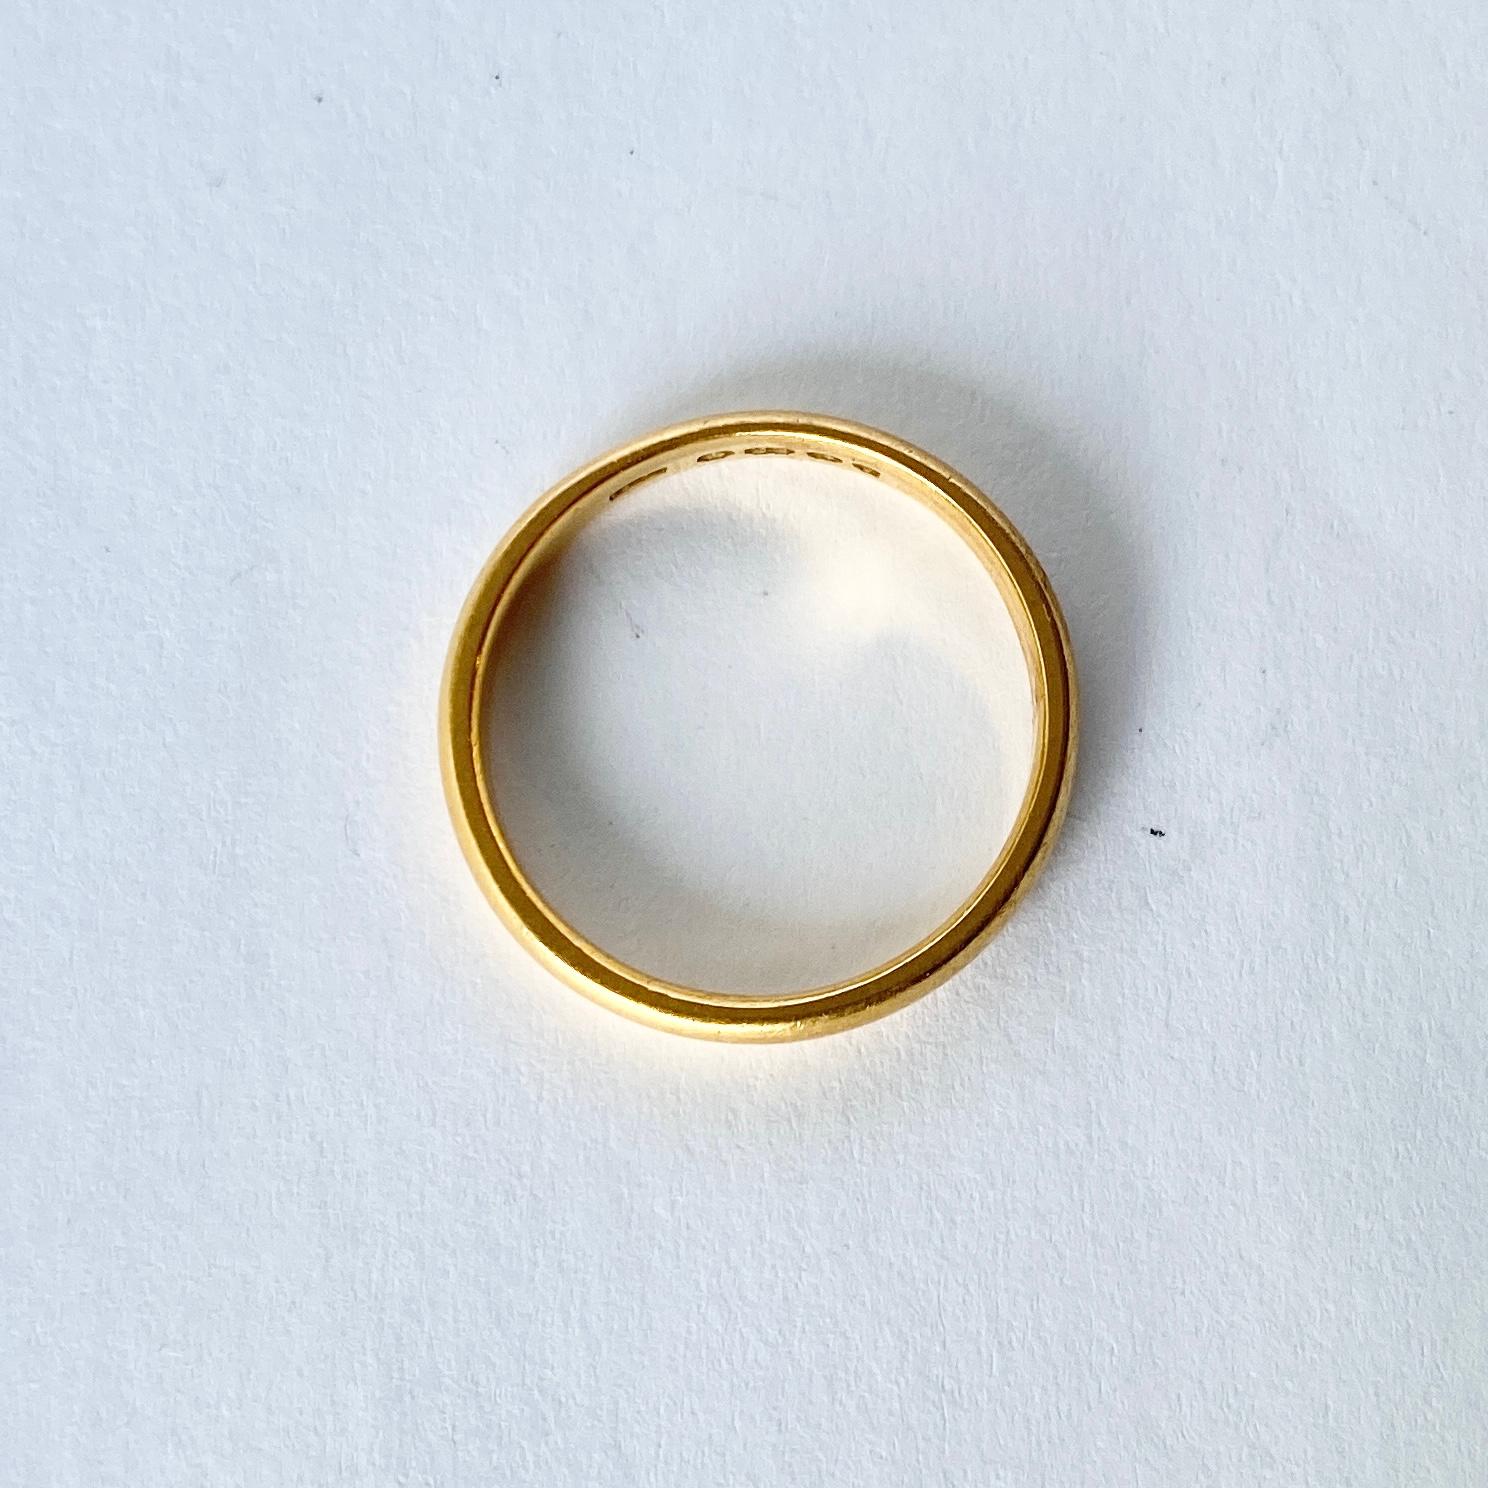 This classic 22ct gold band could be used as a wedding band or a simply lovely everyday ring. Hallmarked Birmingham 1923.

Ring Size: N or 6 3/4 
Band Width: 3mm

Weight: 3.3g